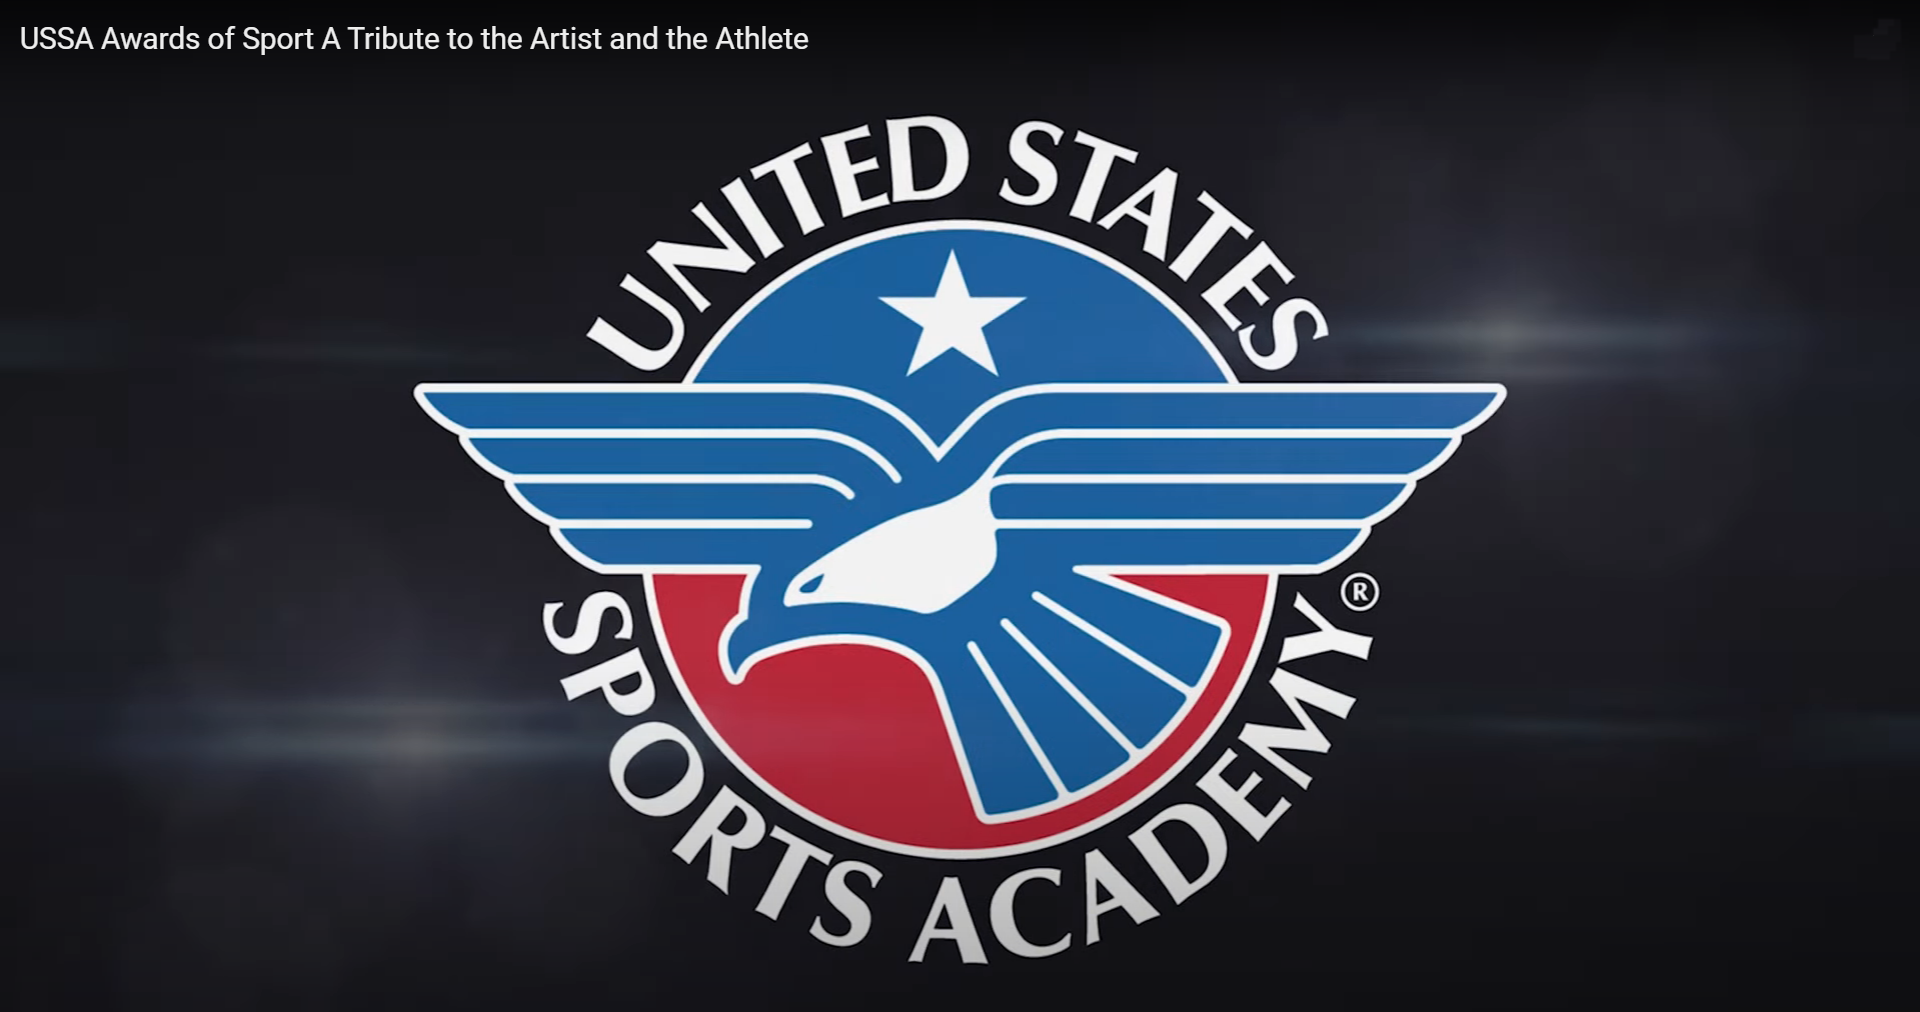 Video - United States Sports Academy